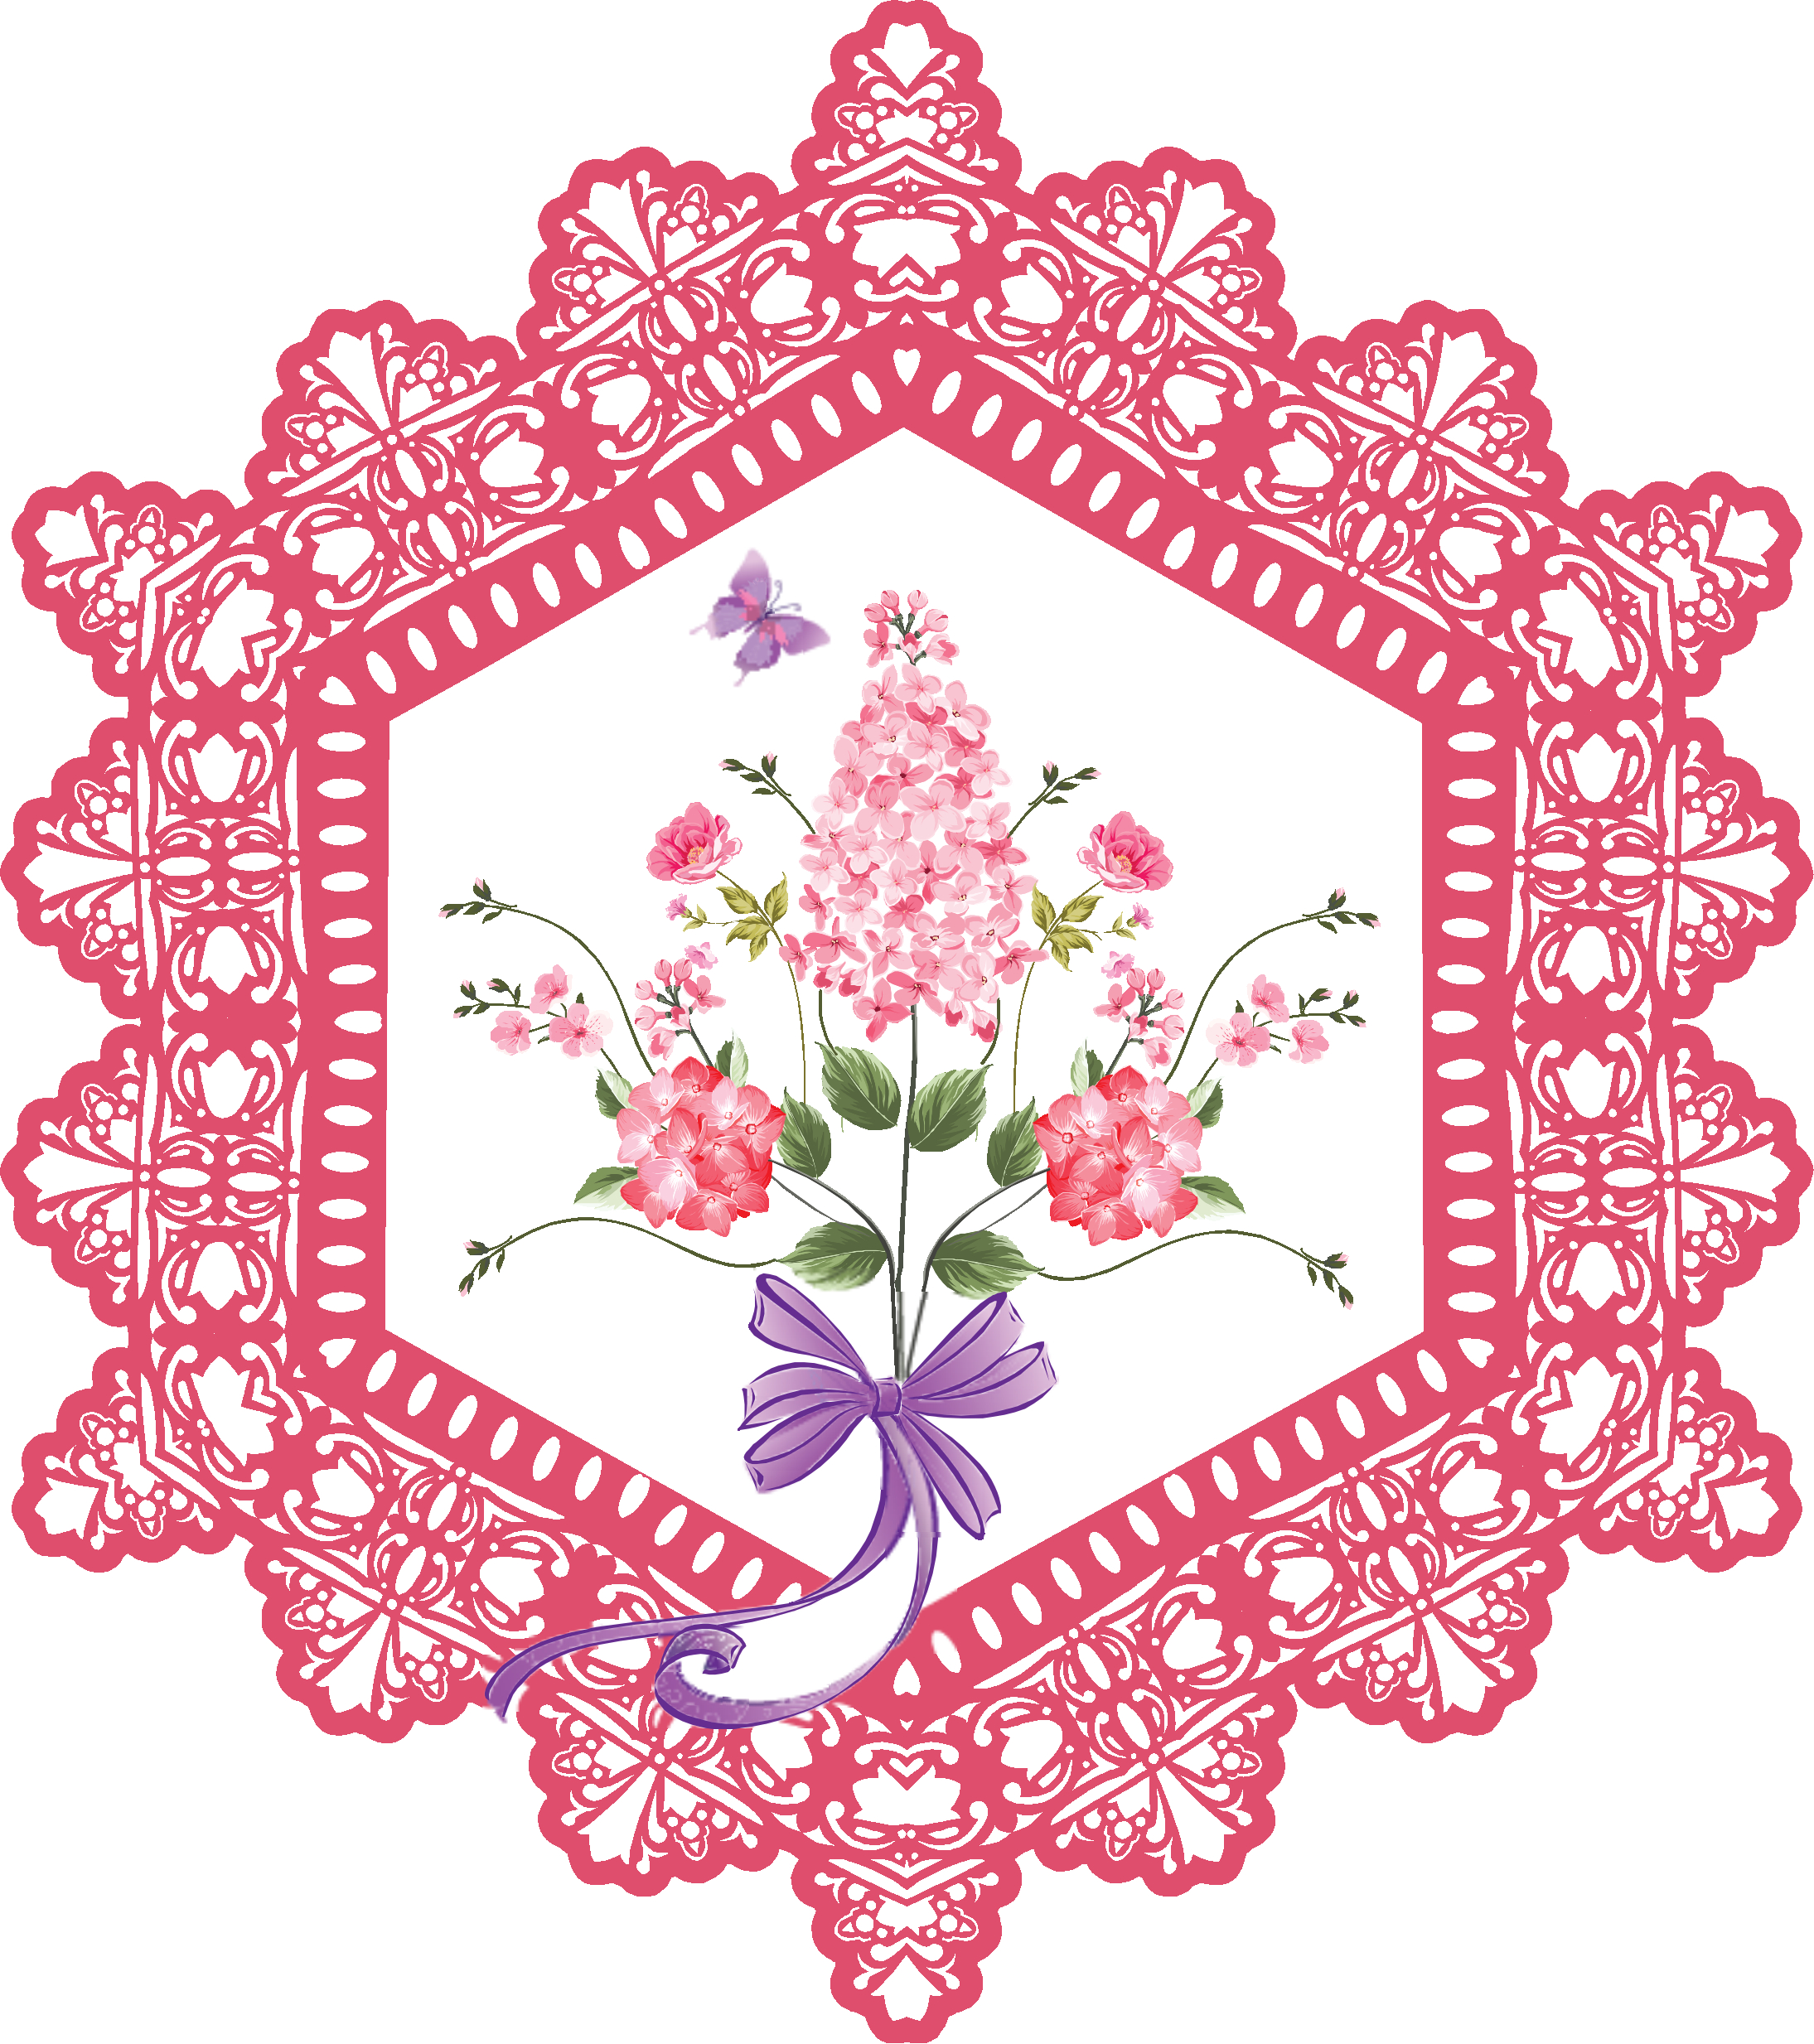 Machine Embroidery Lace Patterns Hd Florals And Lace Is A Downloadable Machine Embroidery In